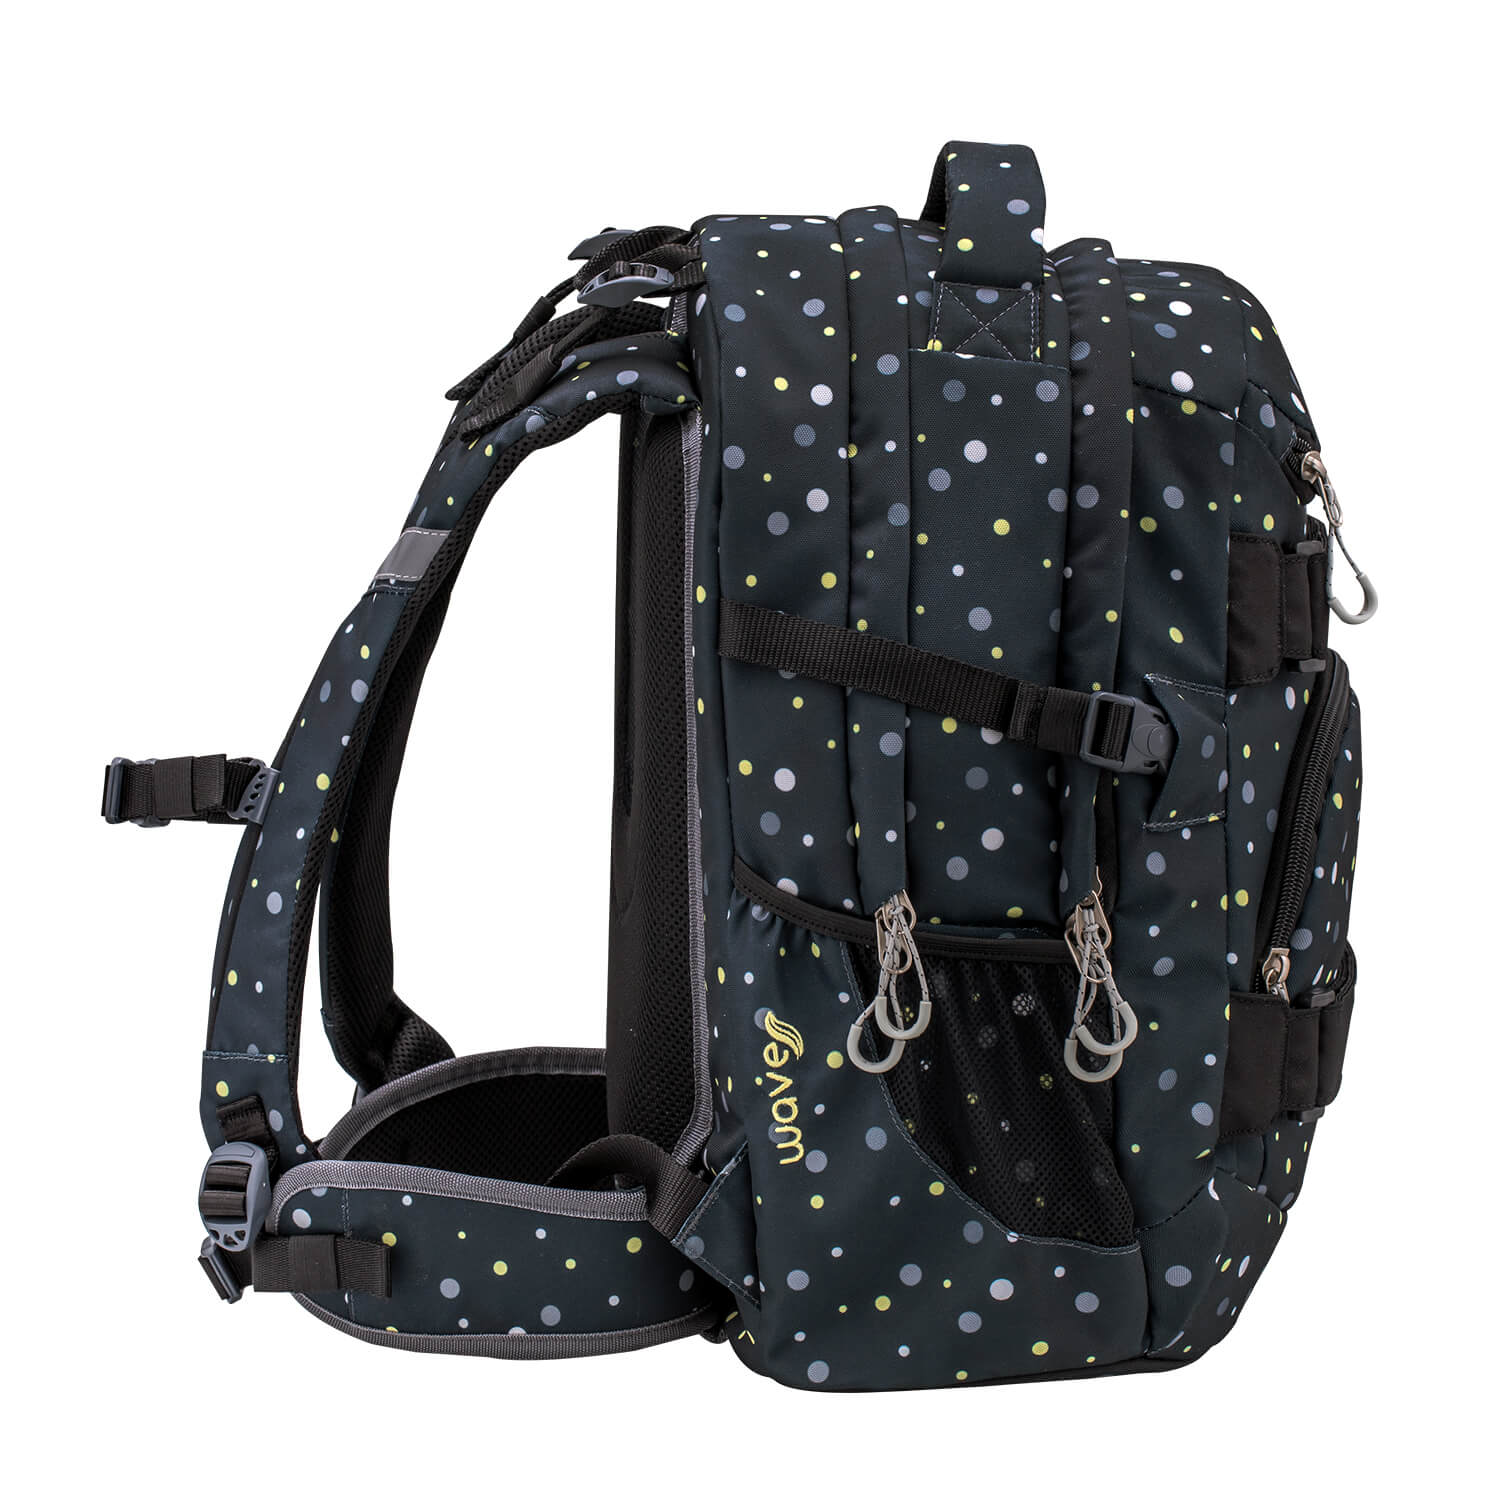 Wave Infinity Black And Yellow Dots Schulrucksack